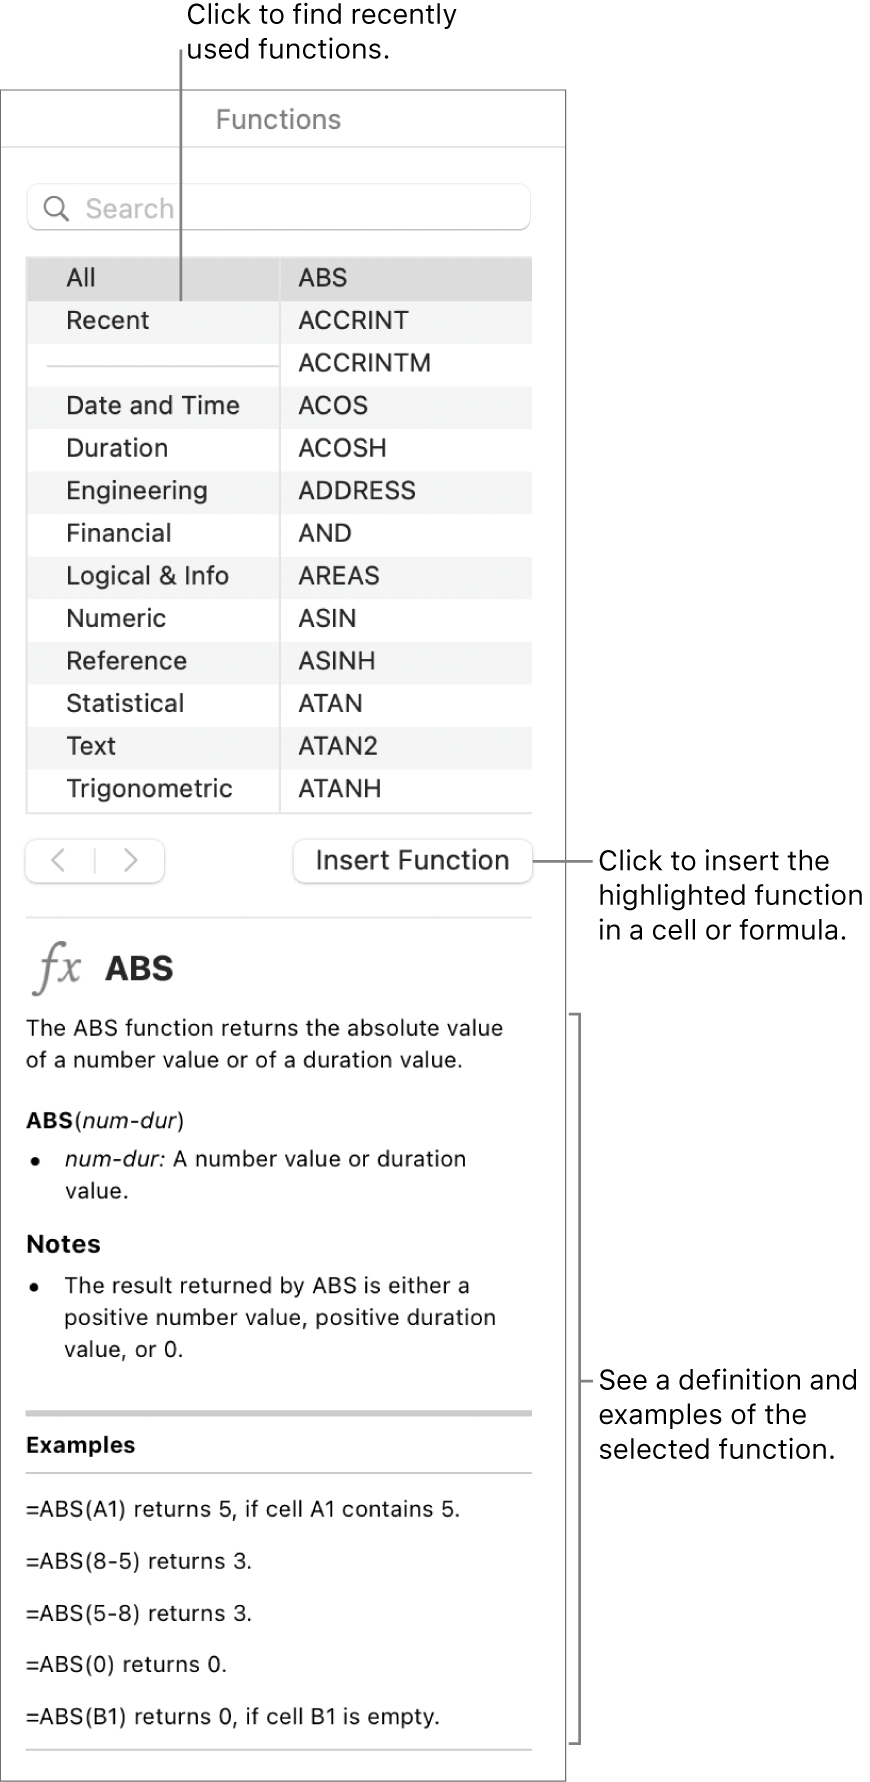 The Functions Browser with callouts to recently used functions, the Insert Function button, and the function definition.